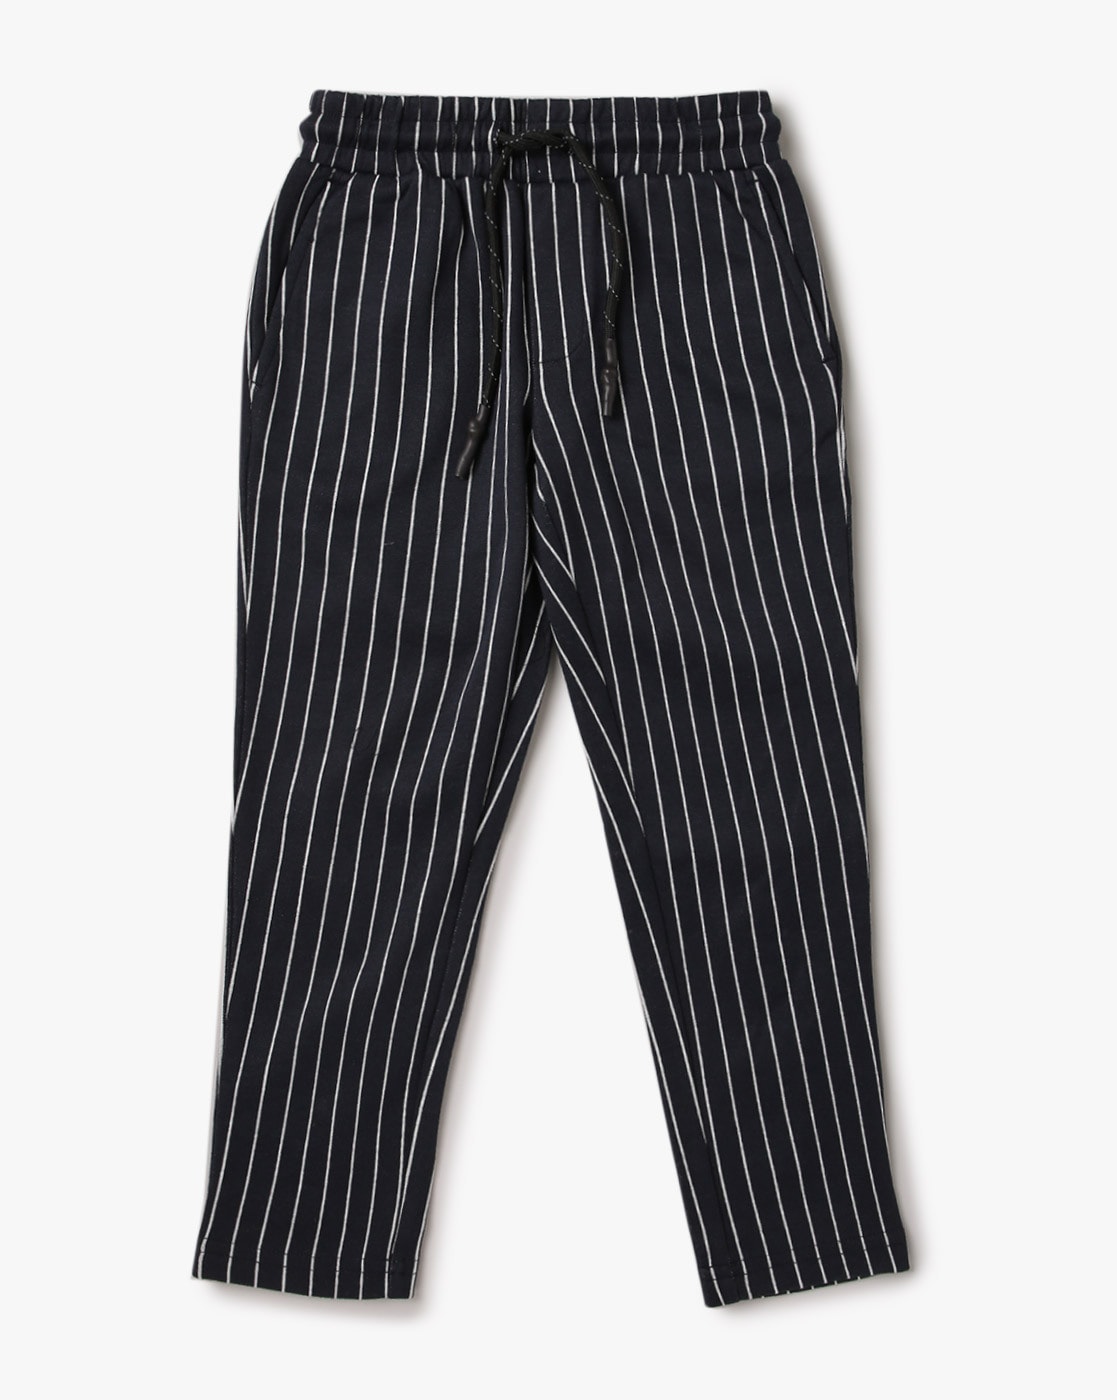 Men's Slim Fit Striped Trousers Skinny Suits Chino Casual Formal Pants |  eBay